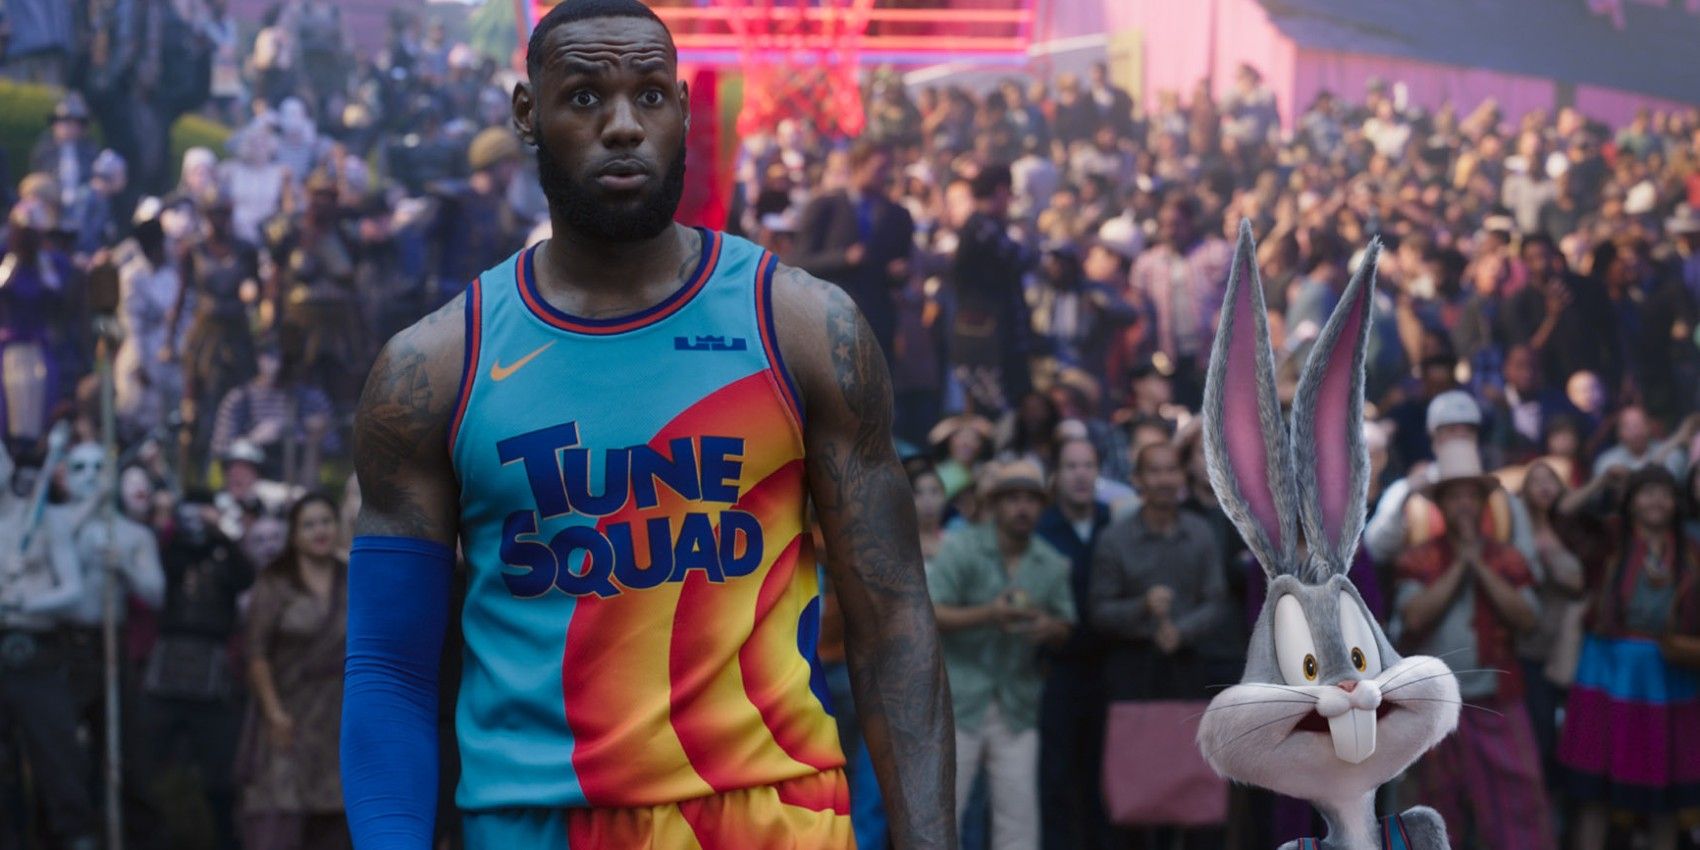 Space Jam 2 Trailer Makes Its Weirdest Bugs Bunny Change Part Of The Story